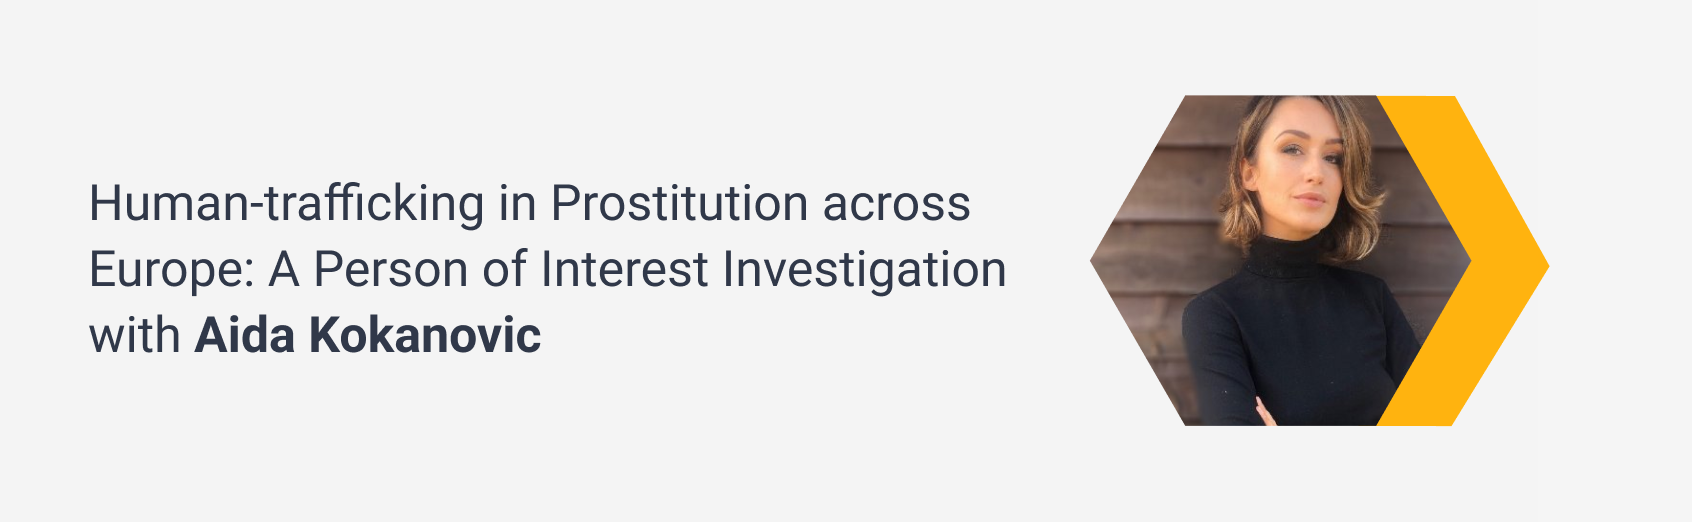 Human-trafficking in Prostitution across Europe: A Person of Interest Investigation with Aida Kokanovic